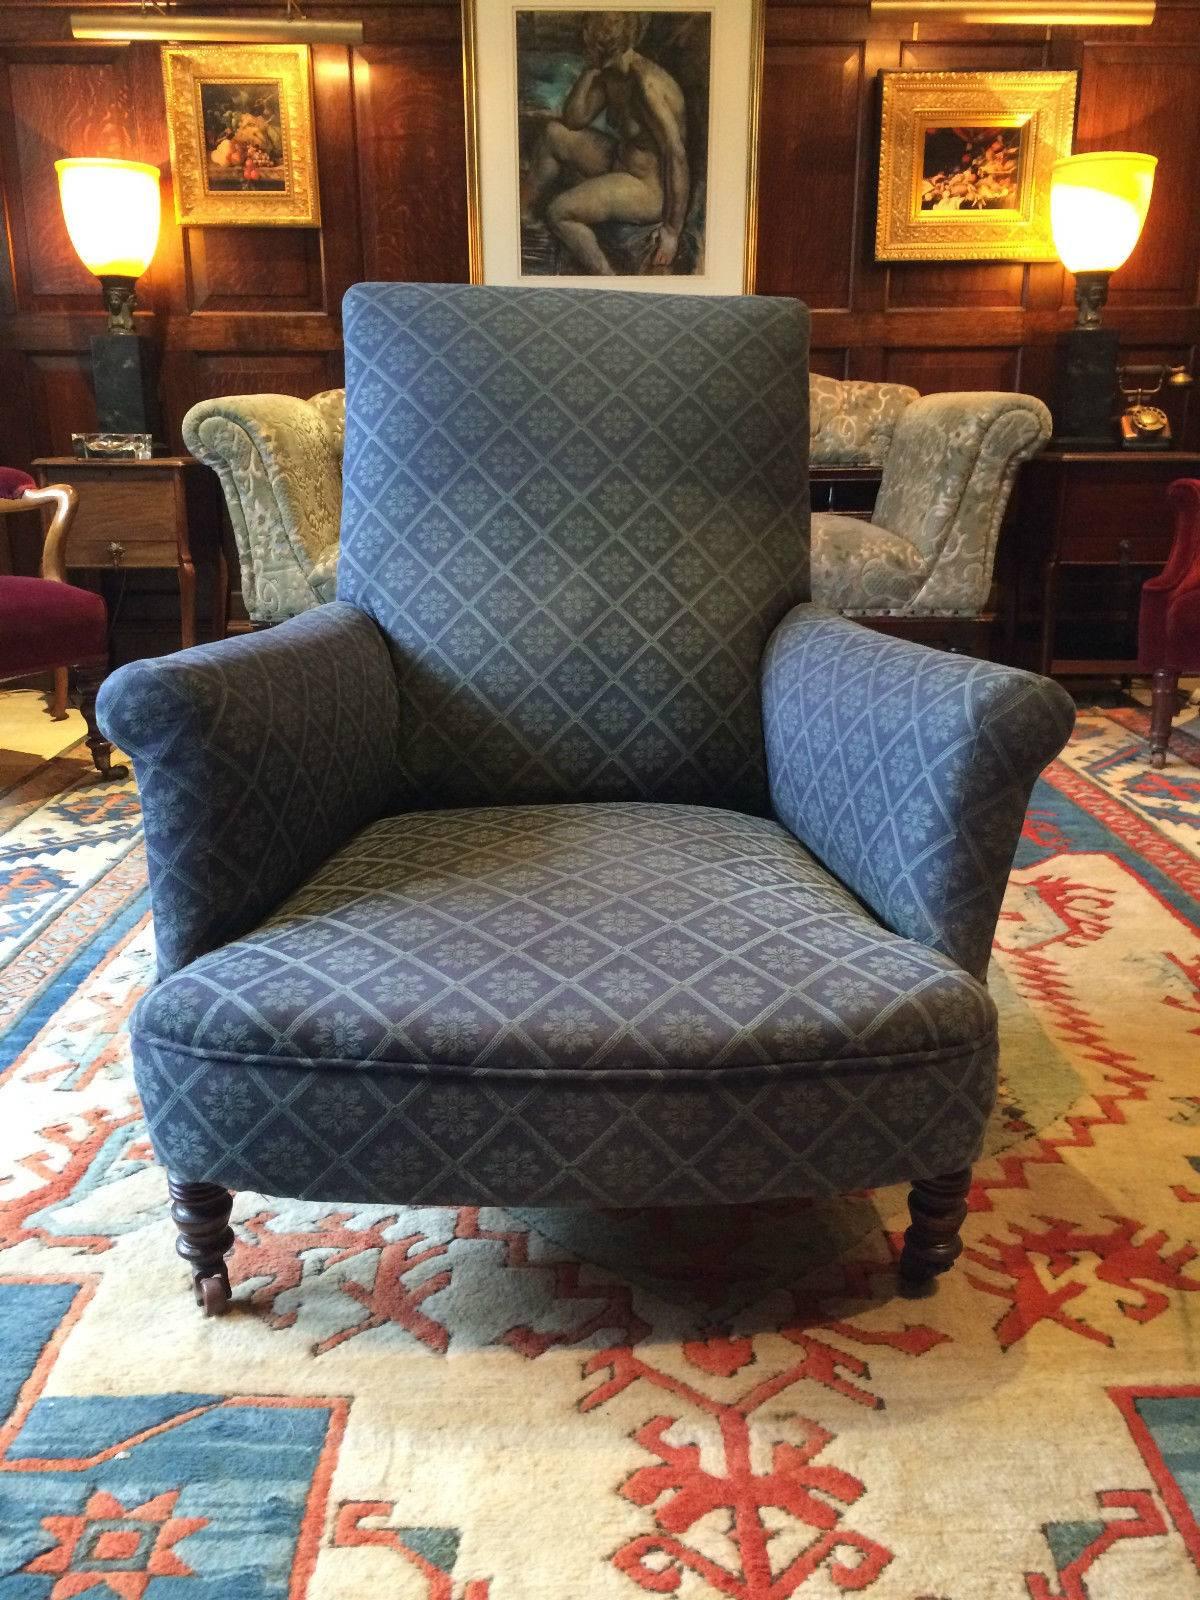 A beautiful 19th century Howard & Sons style mahogany ‘Club Chair’ armchair with gorgeous low, long sweeping seat and curved back, dressed in a blue and green material and standing on turned front legs with casters, chair is ideal for reupholstering